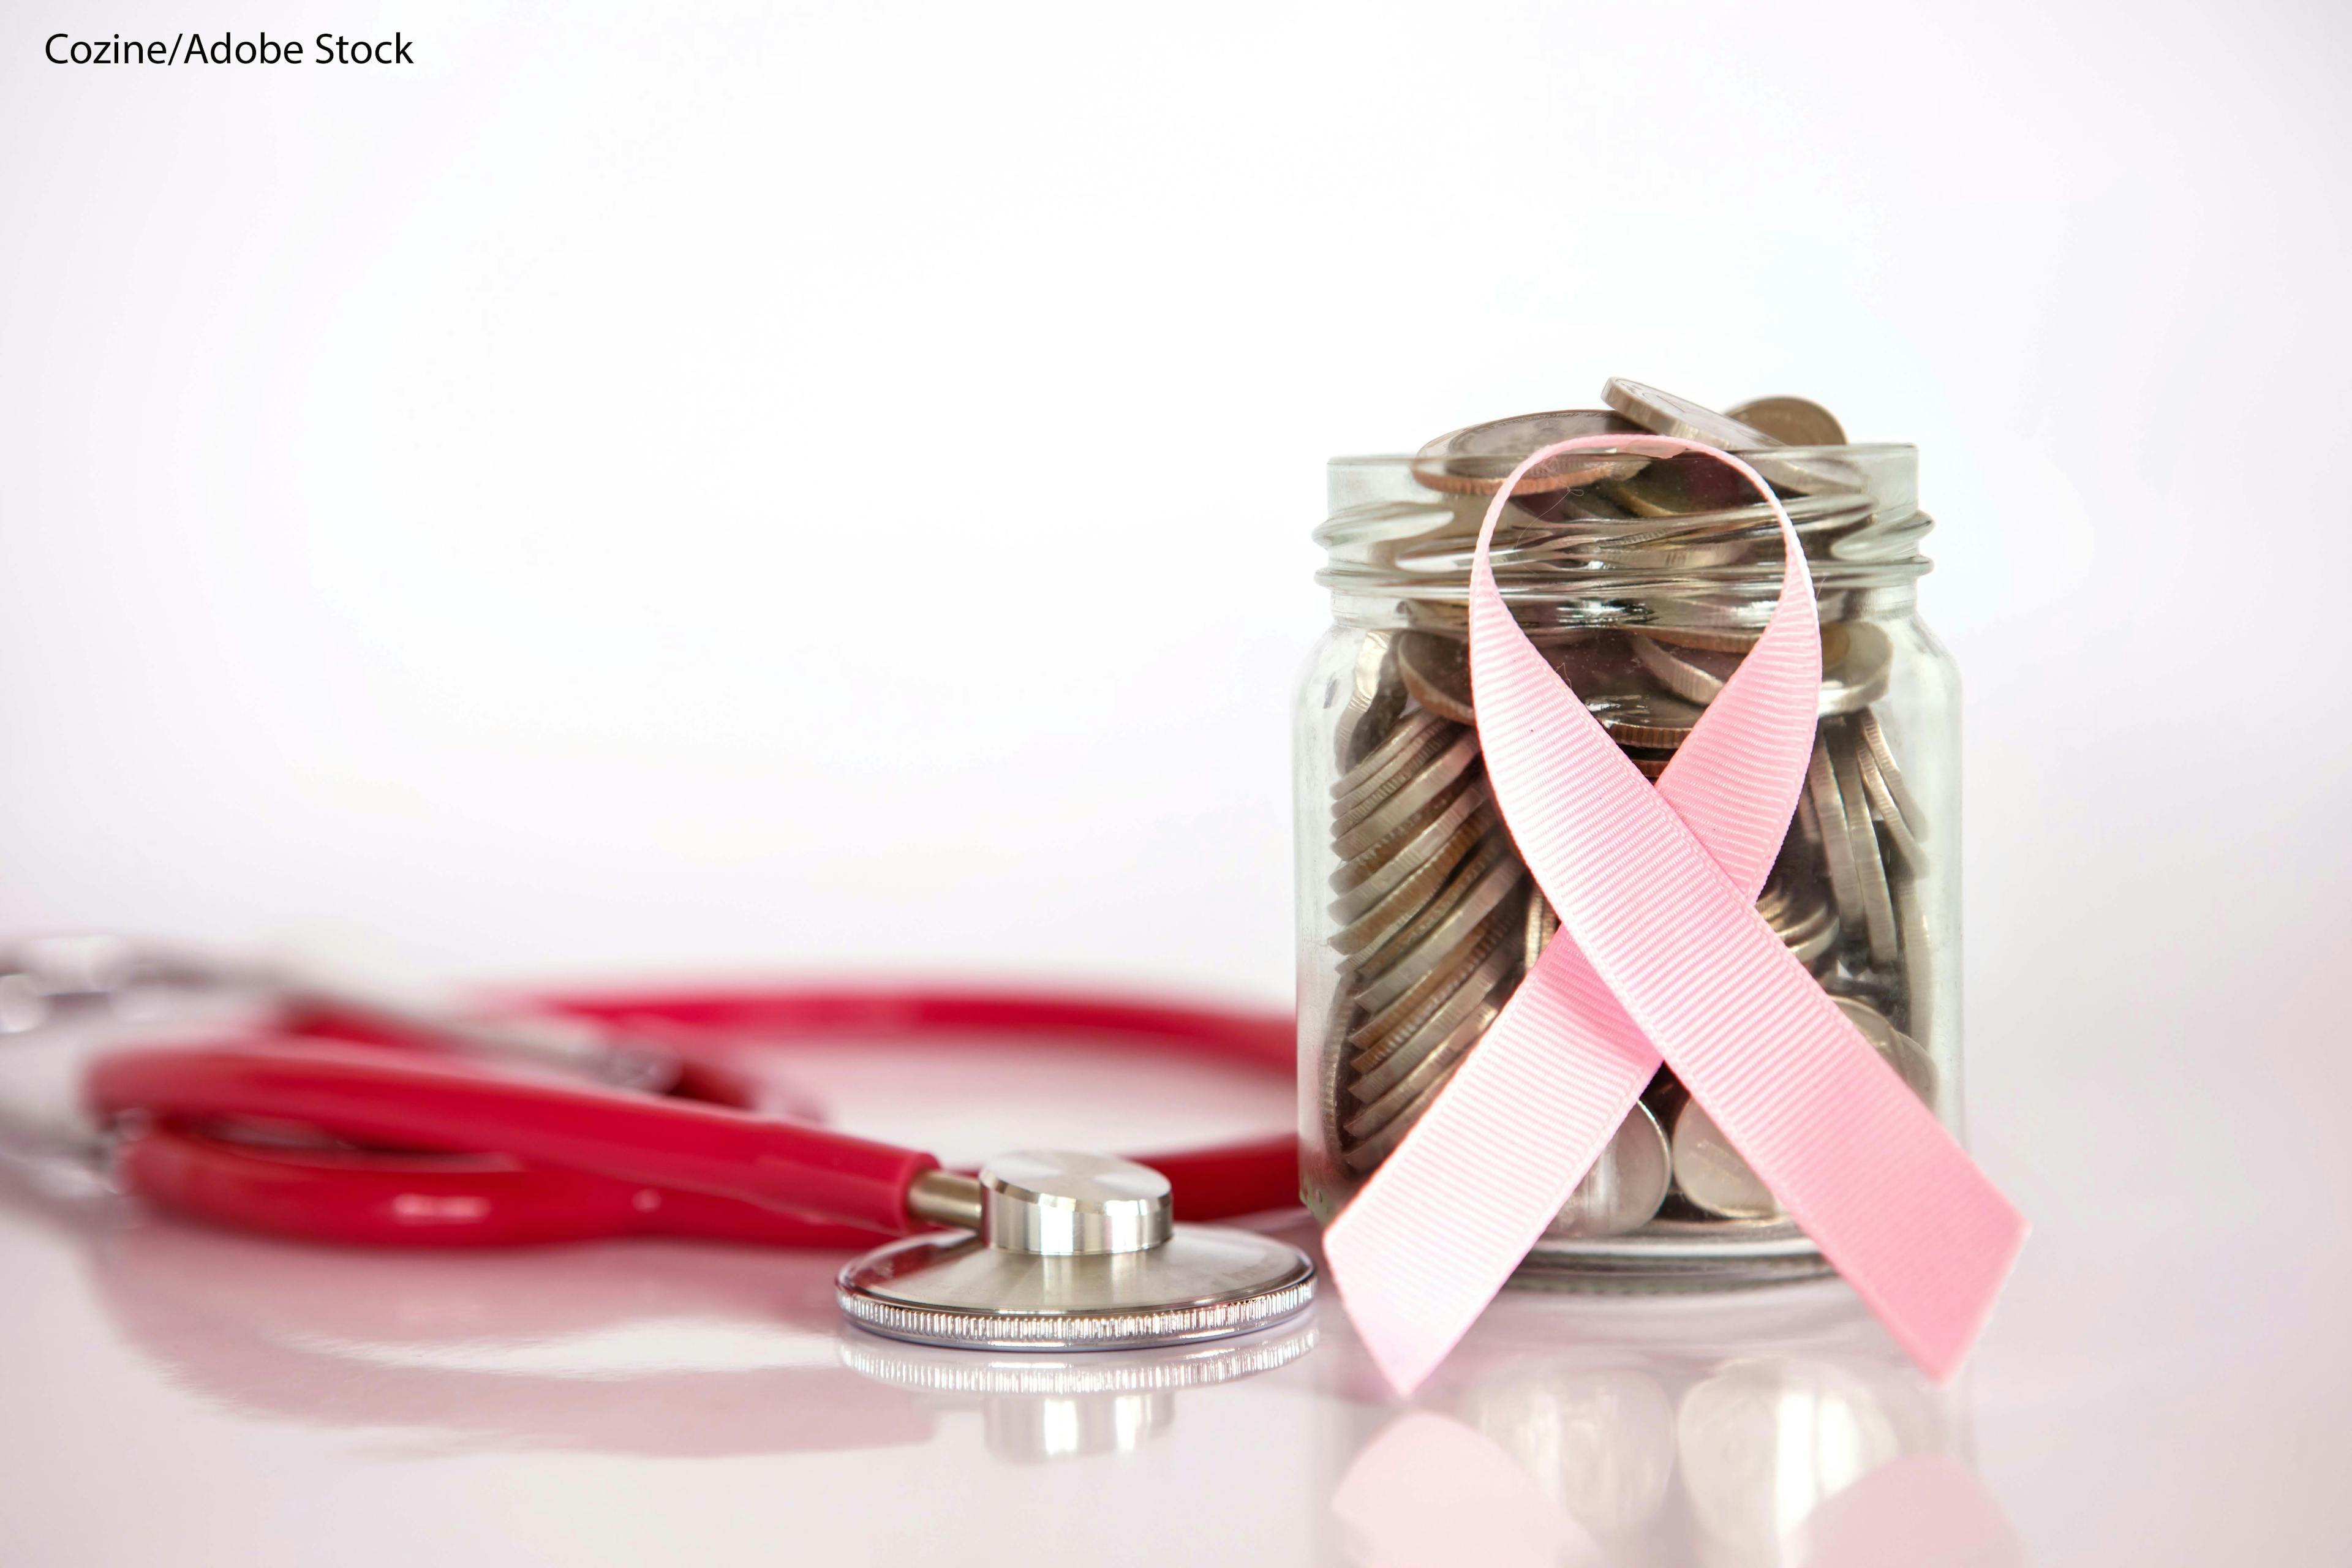 What Influence Do Treatment Costs Have on Breast Cancer Surgery Preferences?